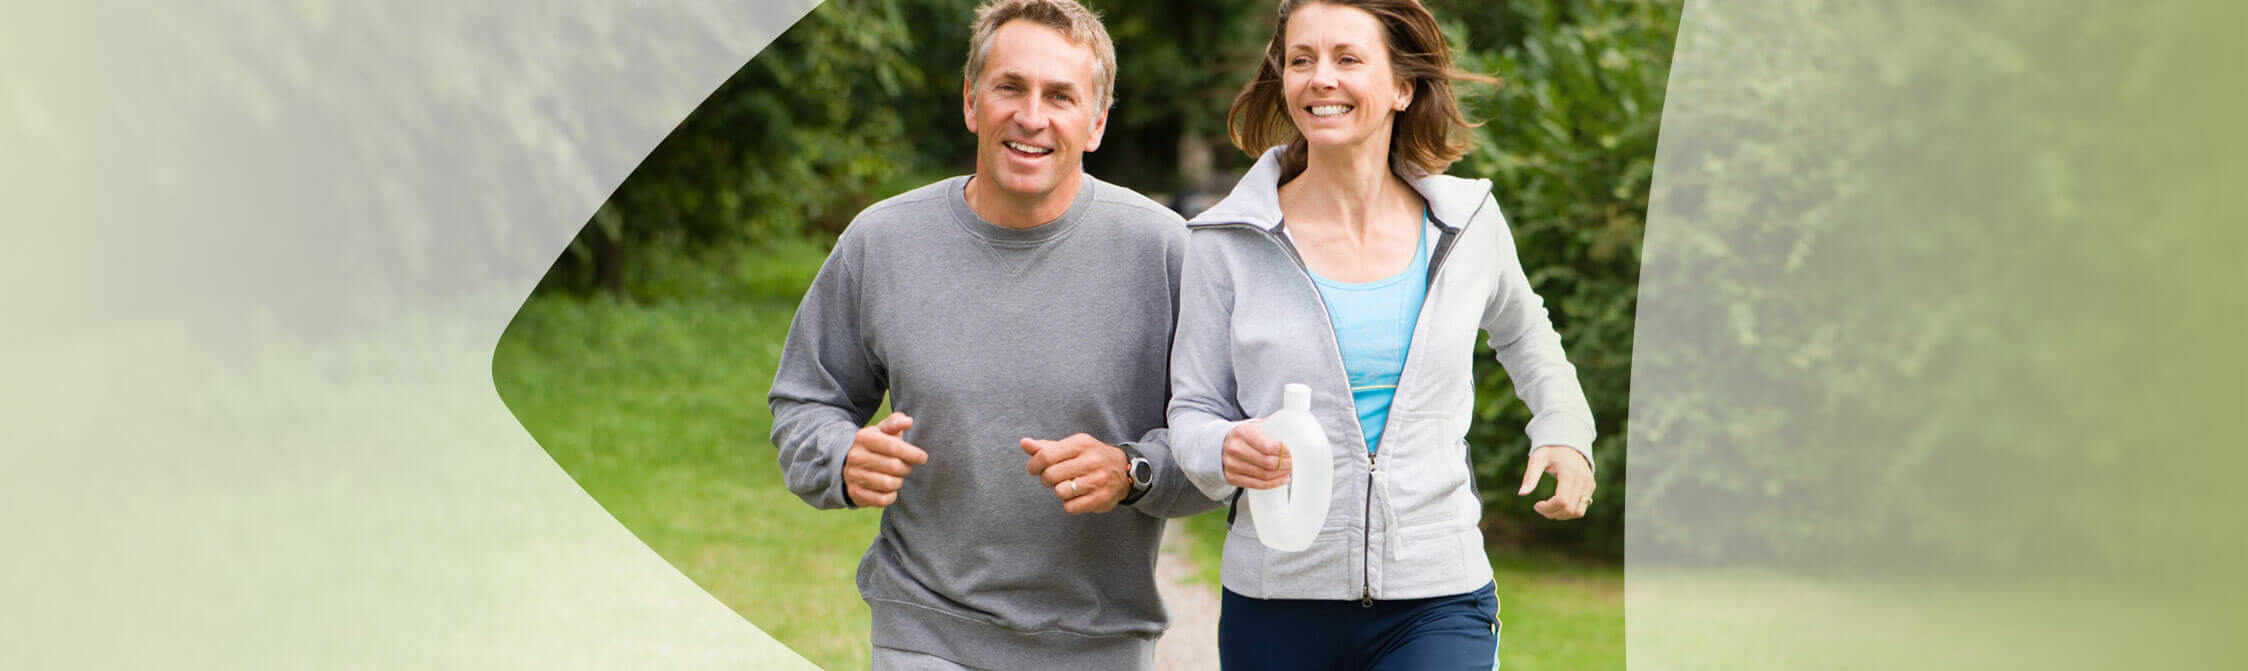 Couple happily jogging together